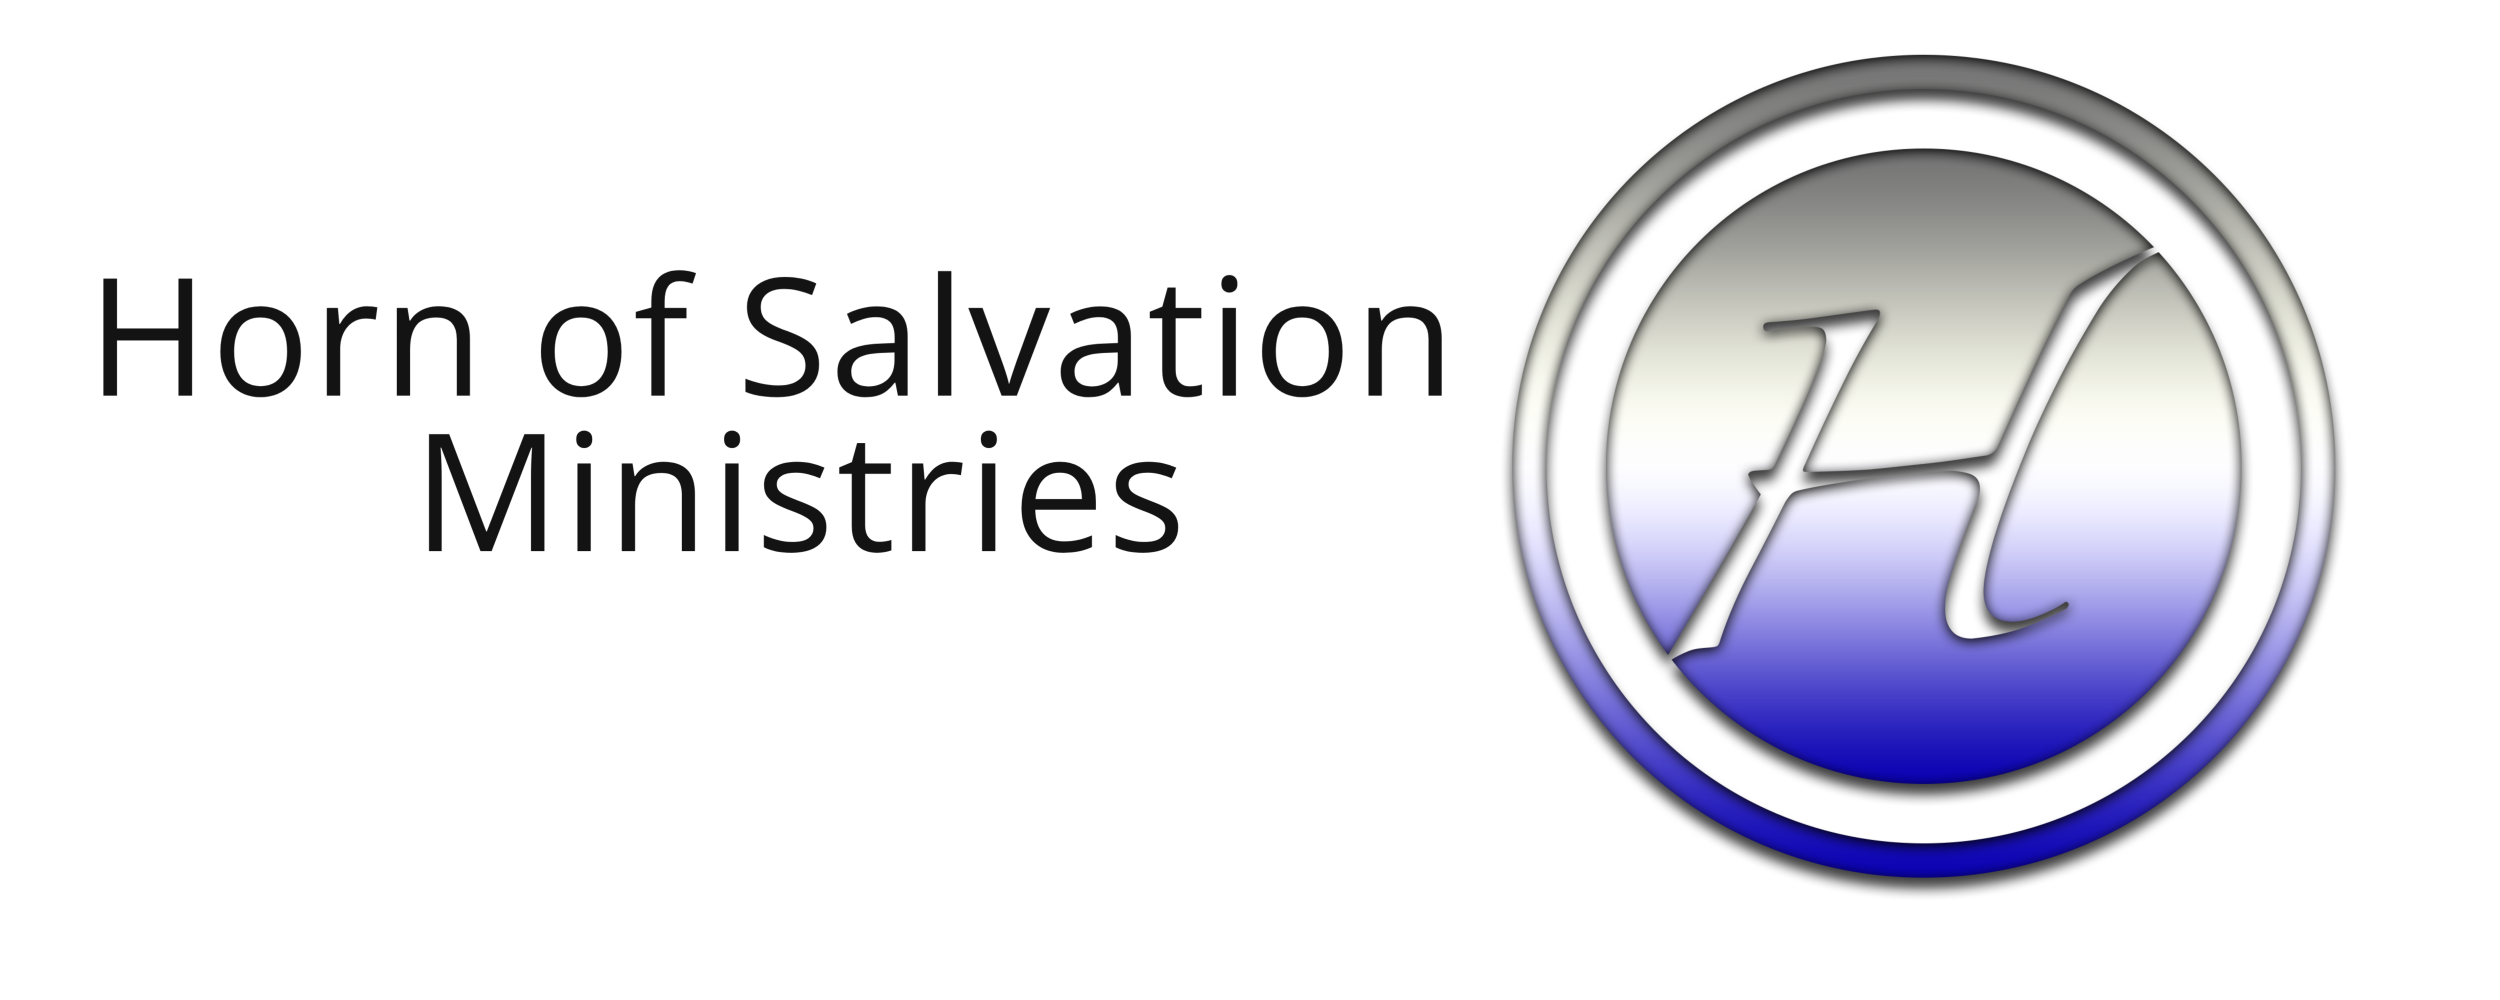 Horn of Salvation Ministries Inc. 